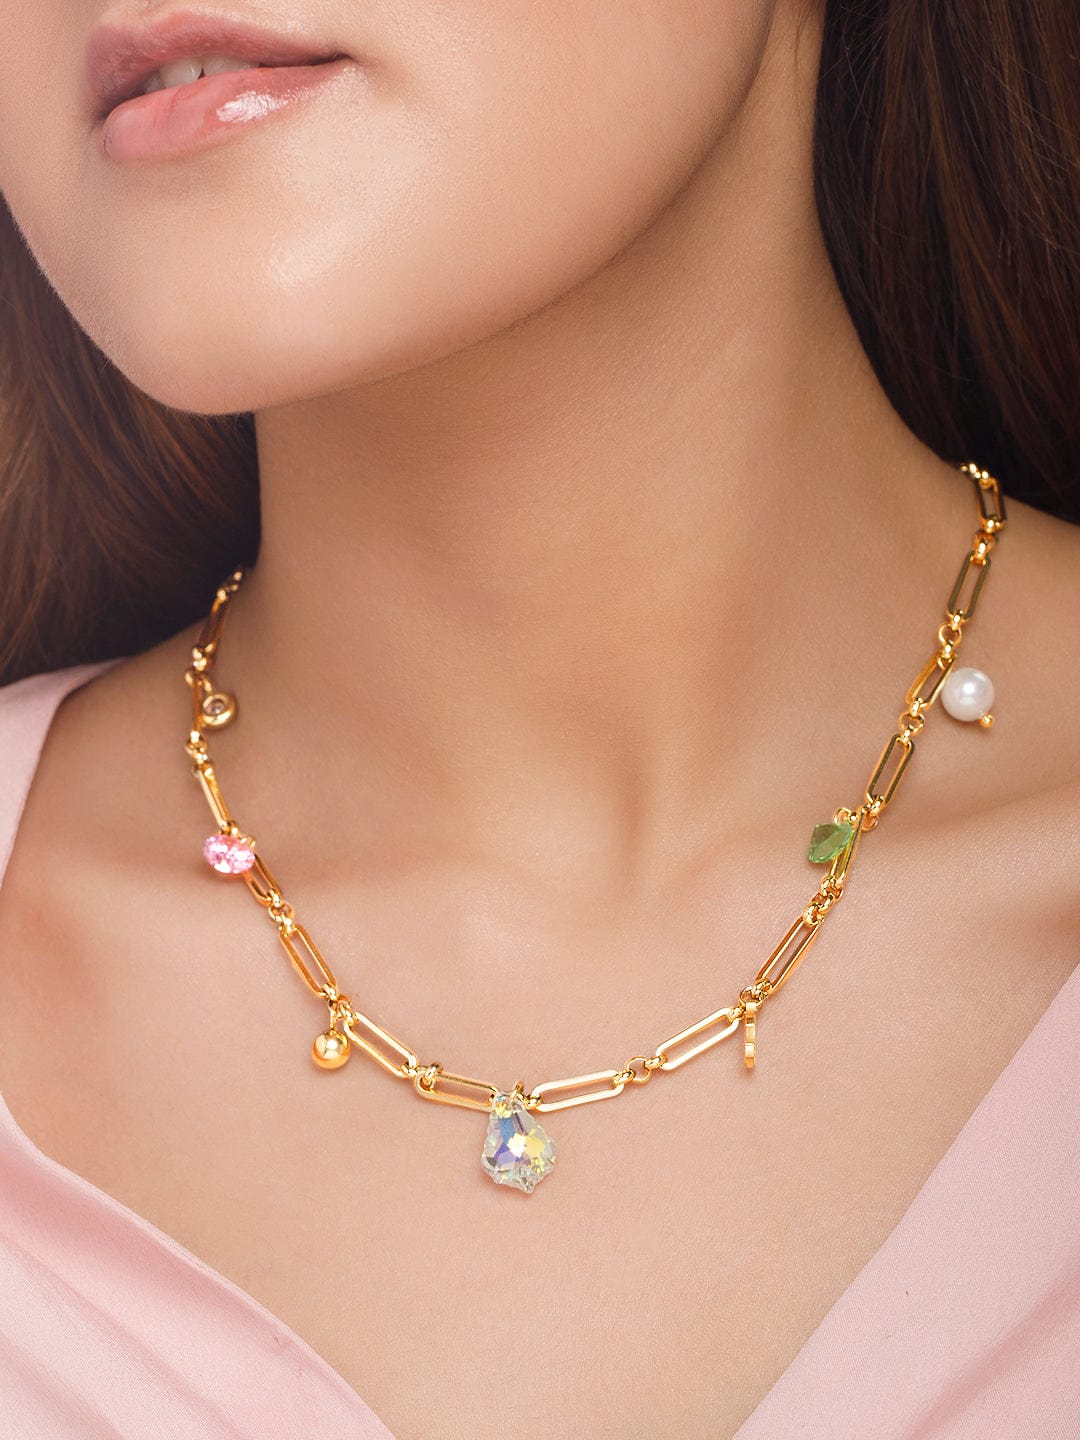 Rubans Voguish 24k Gold-Plated Multi-Coloured Stone Studded Handcrafted Chain Necklace Necklace